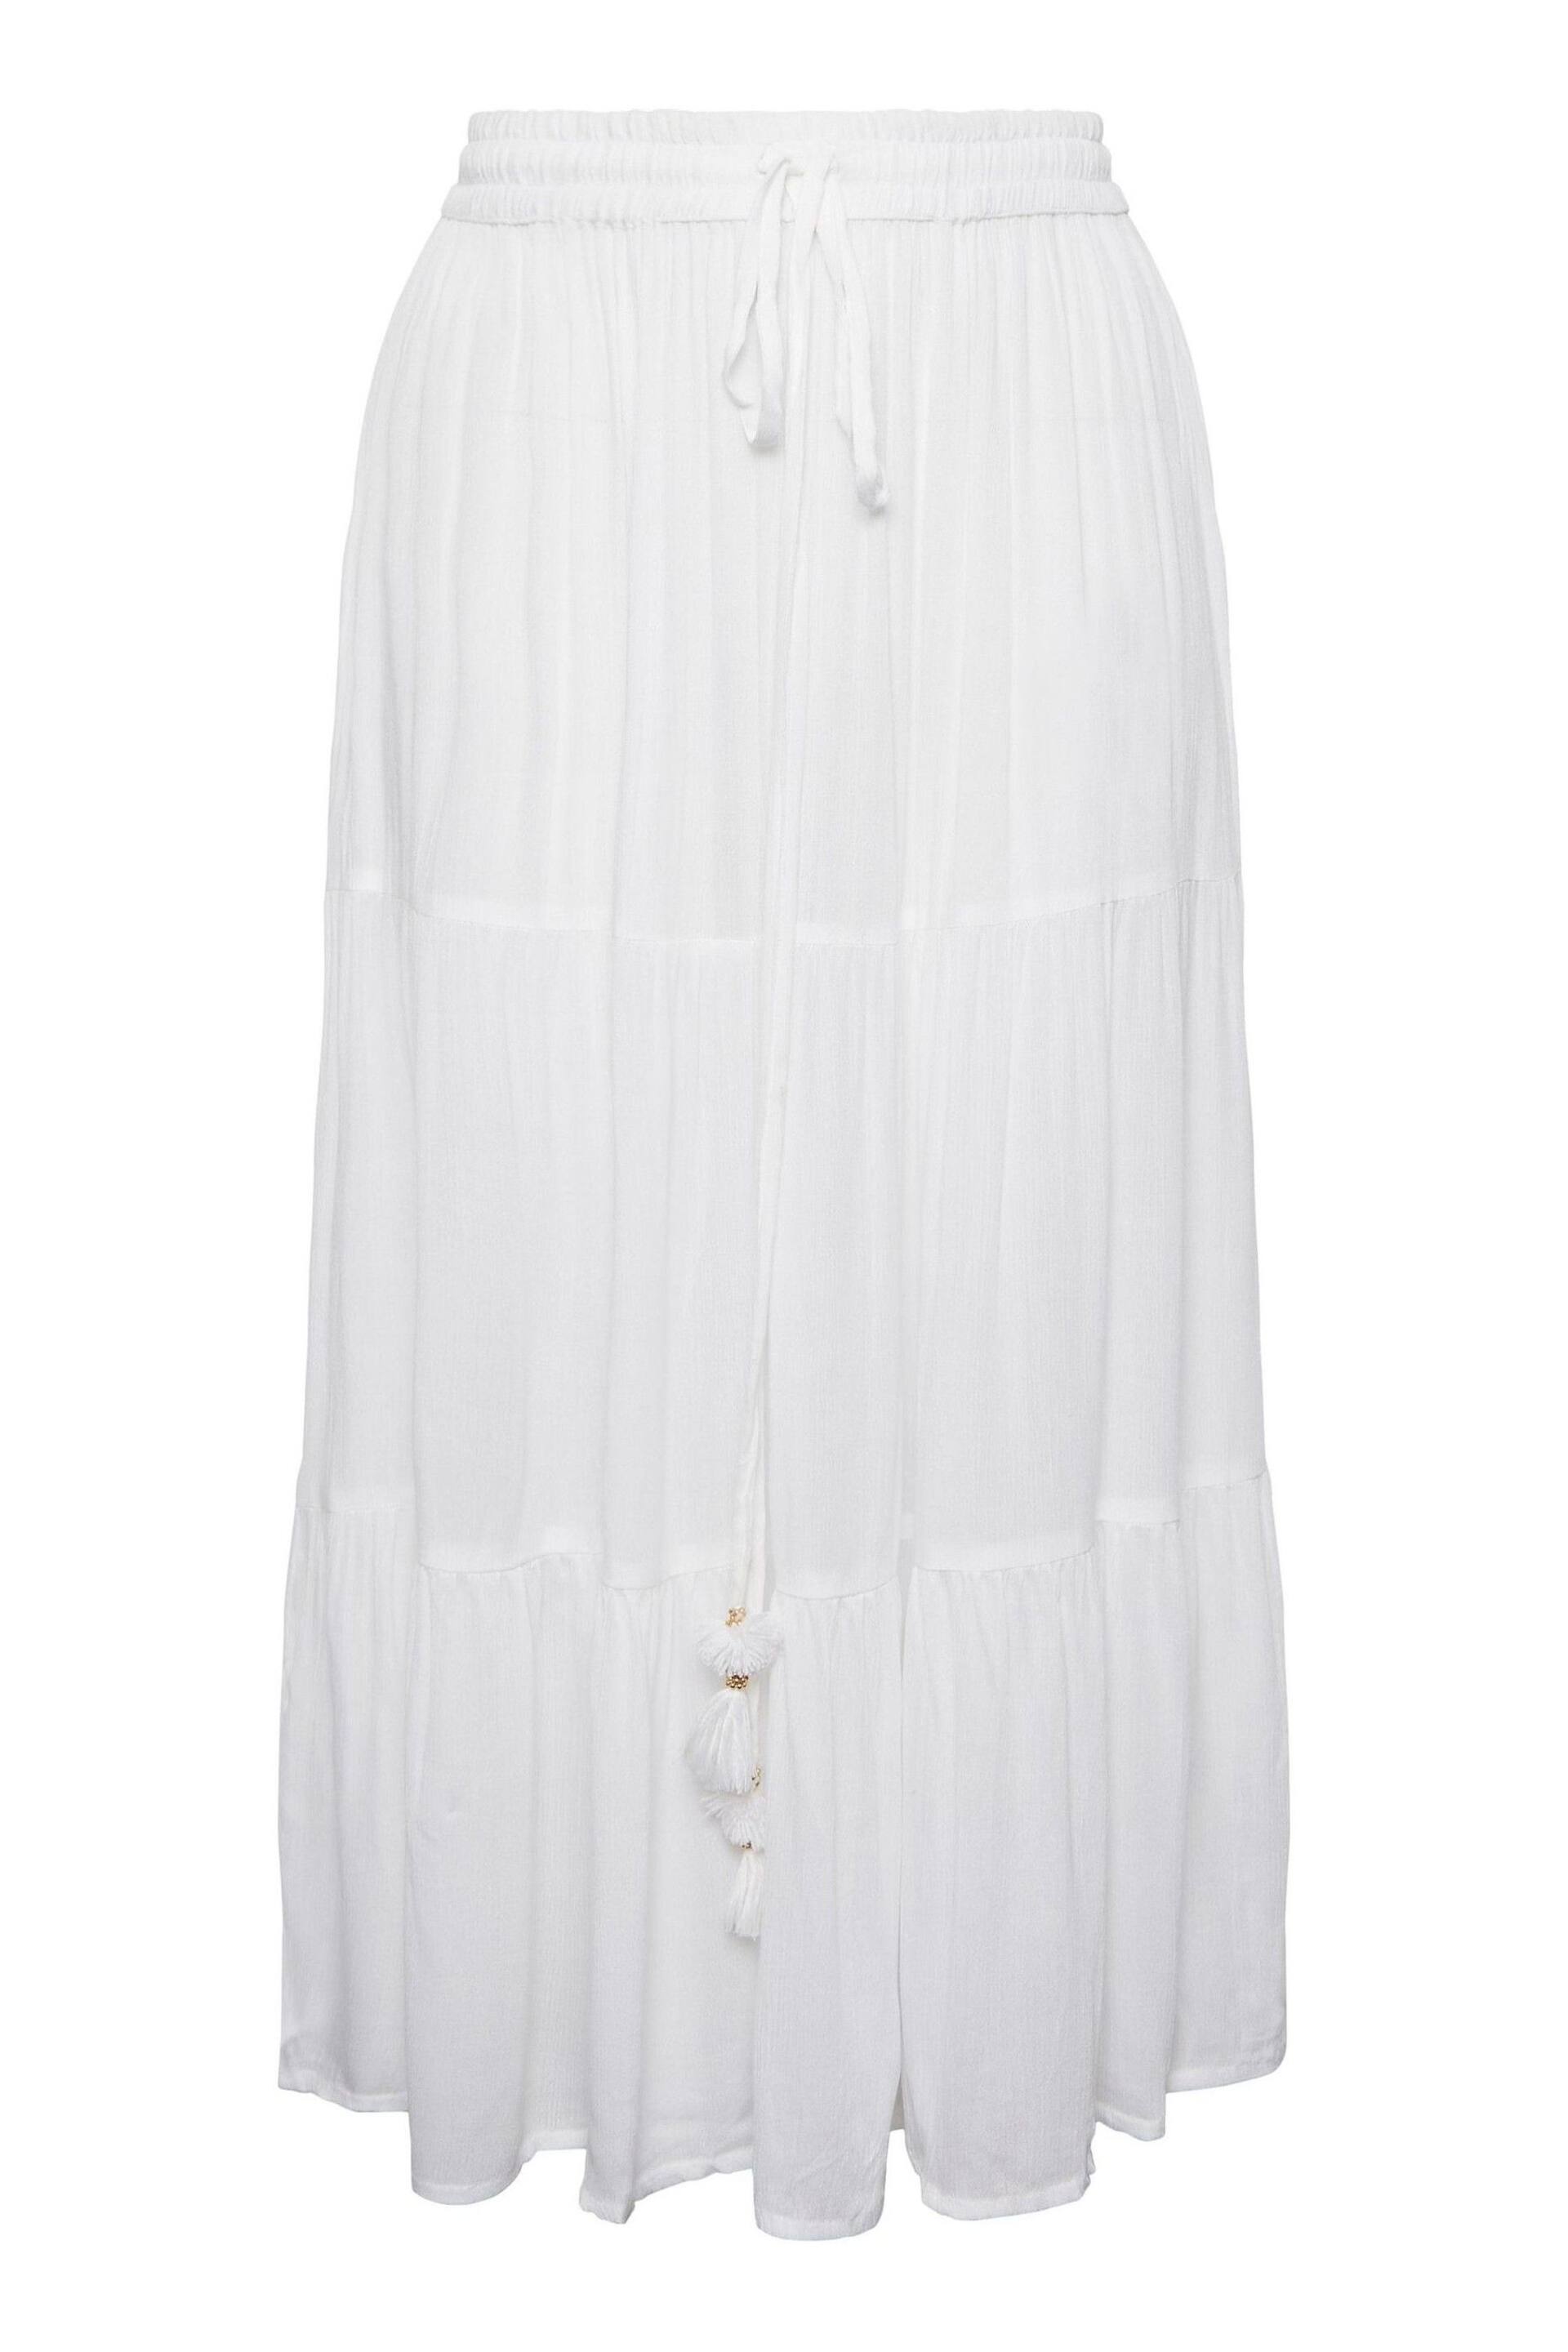 Yours Curve White Beach Skirt - Image 3 of 4